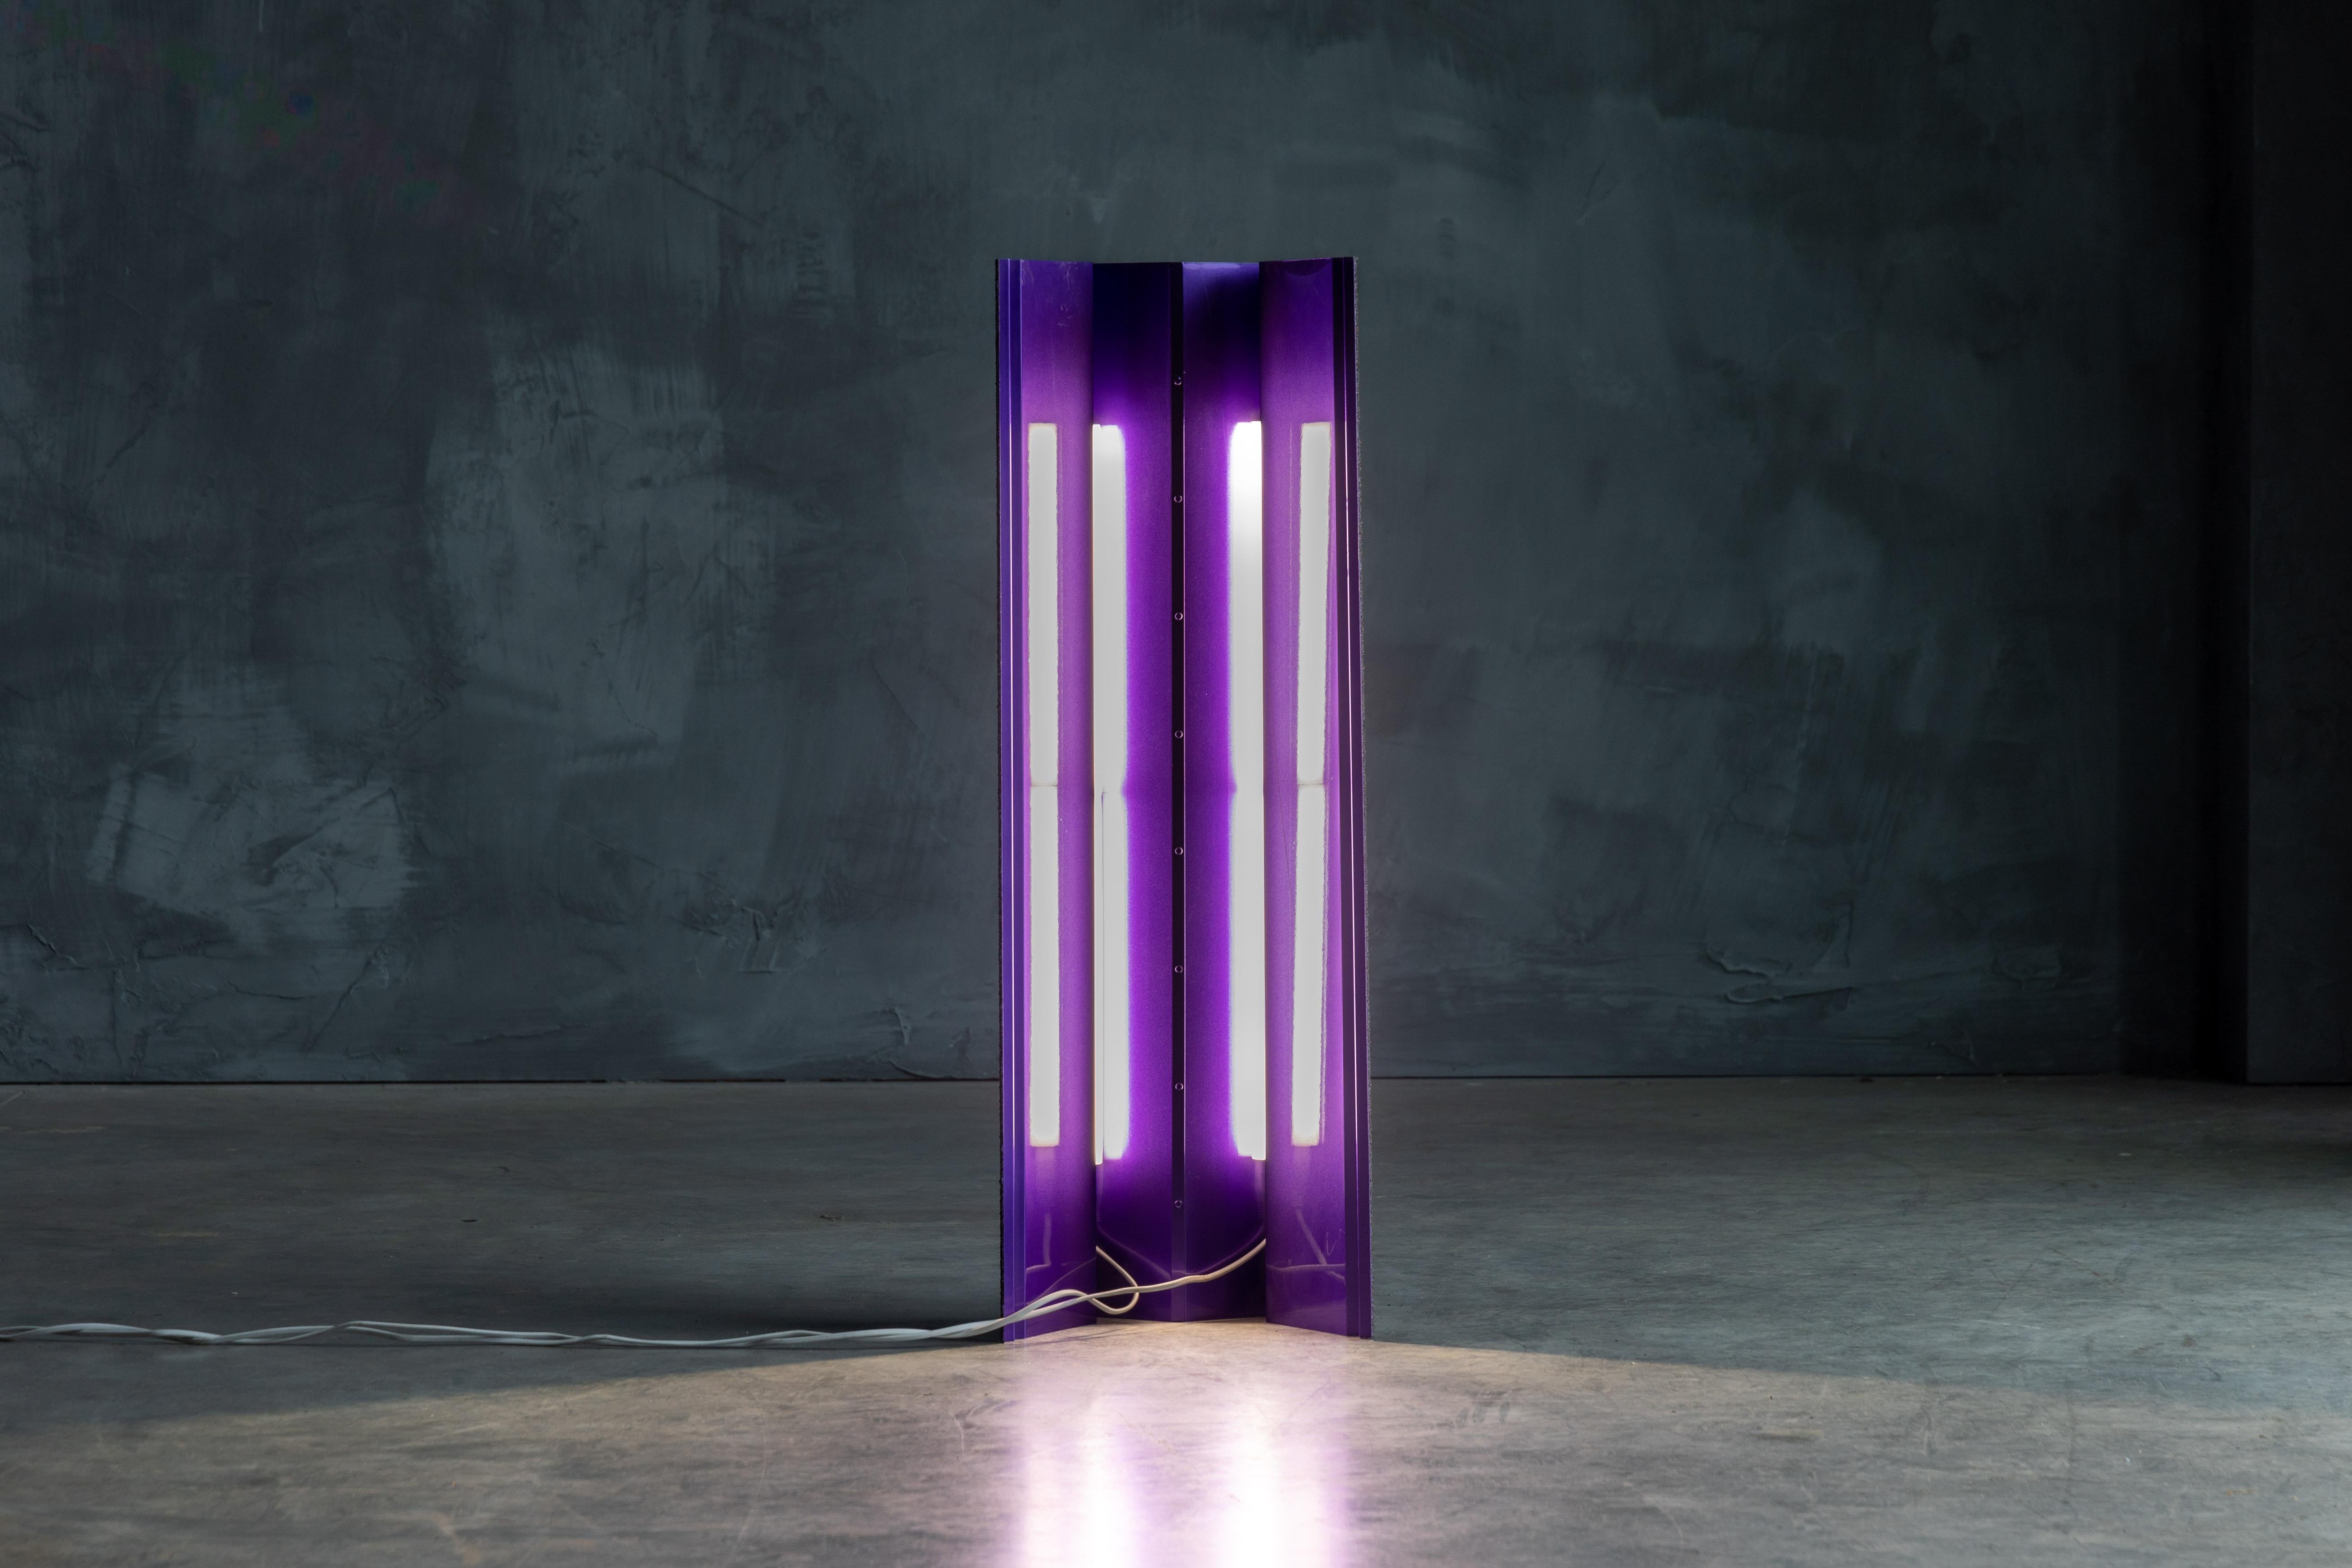 Floor lamp by Koos Breen, a standout creation featured at READY, SET, GO! Presented by Better Know As Collective during the prestigious Salone Del Mobile, Milan 2018. Crafted from purple lacquered aluminum, its striking hue adds a pop of color while